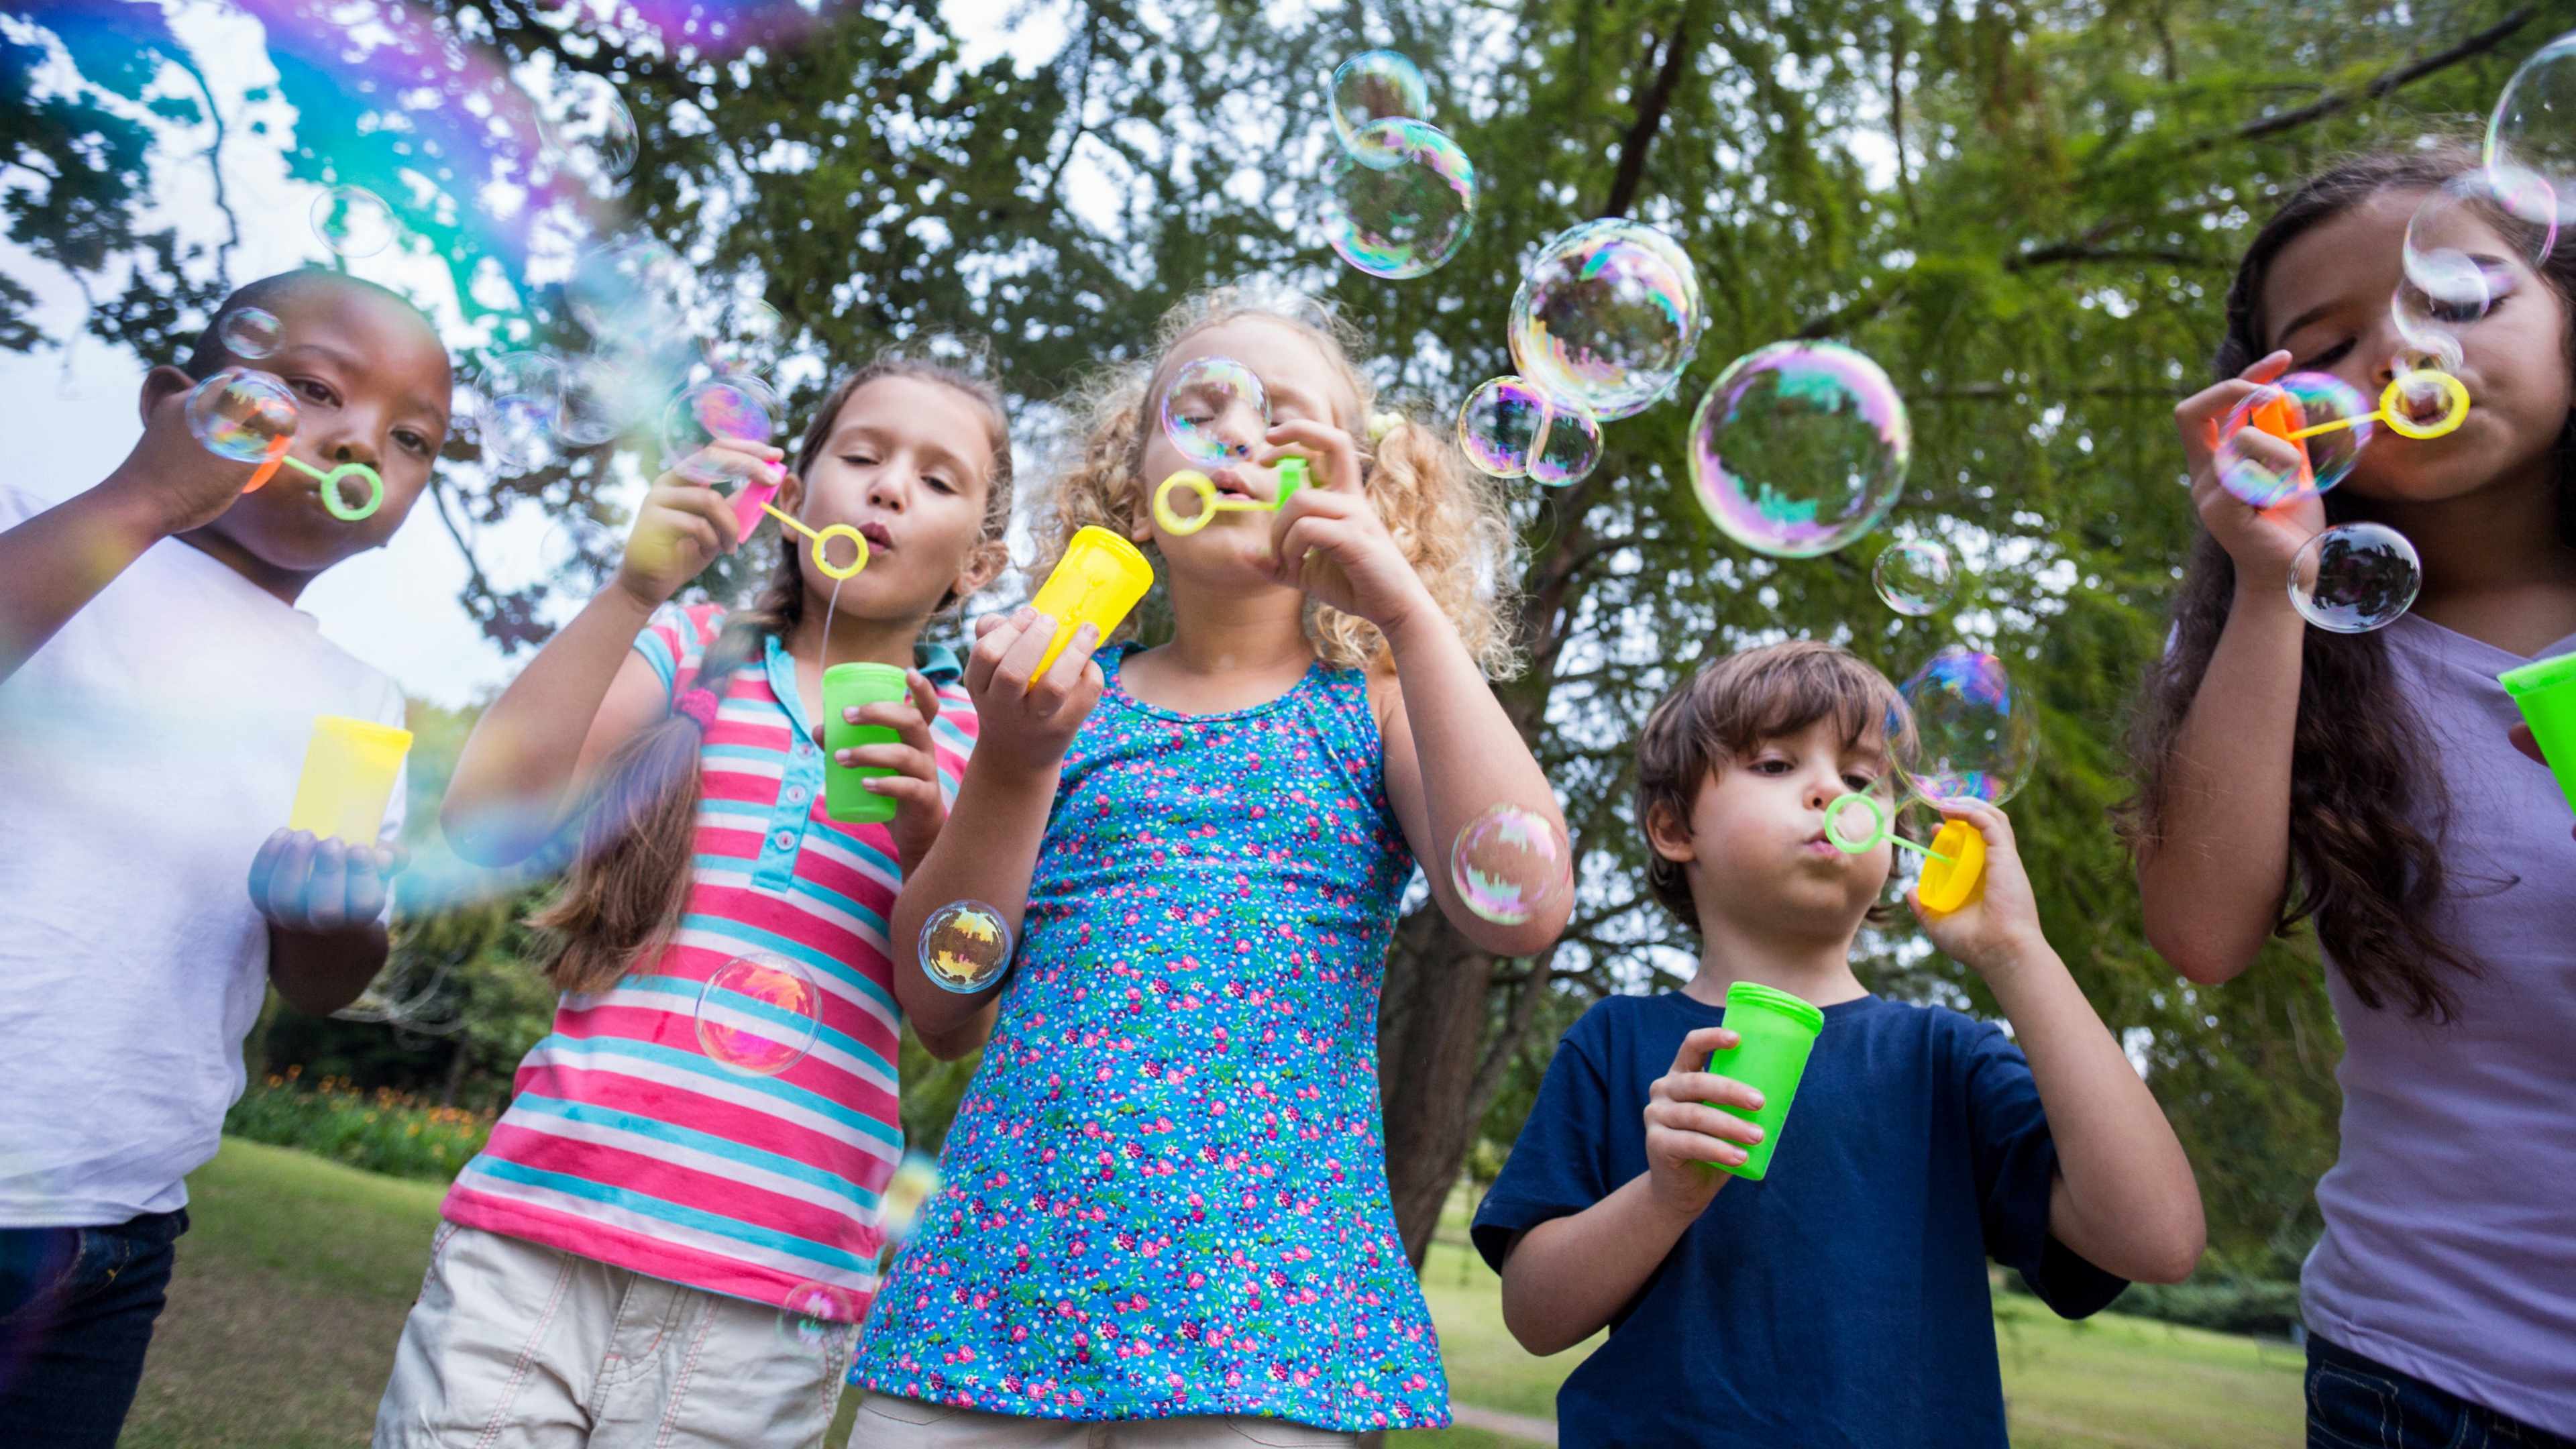 children with positive energy playing and having fun blowing bubbles